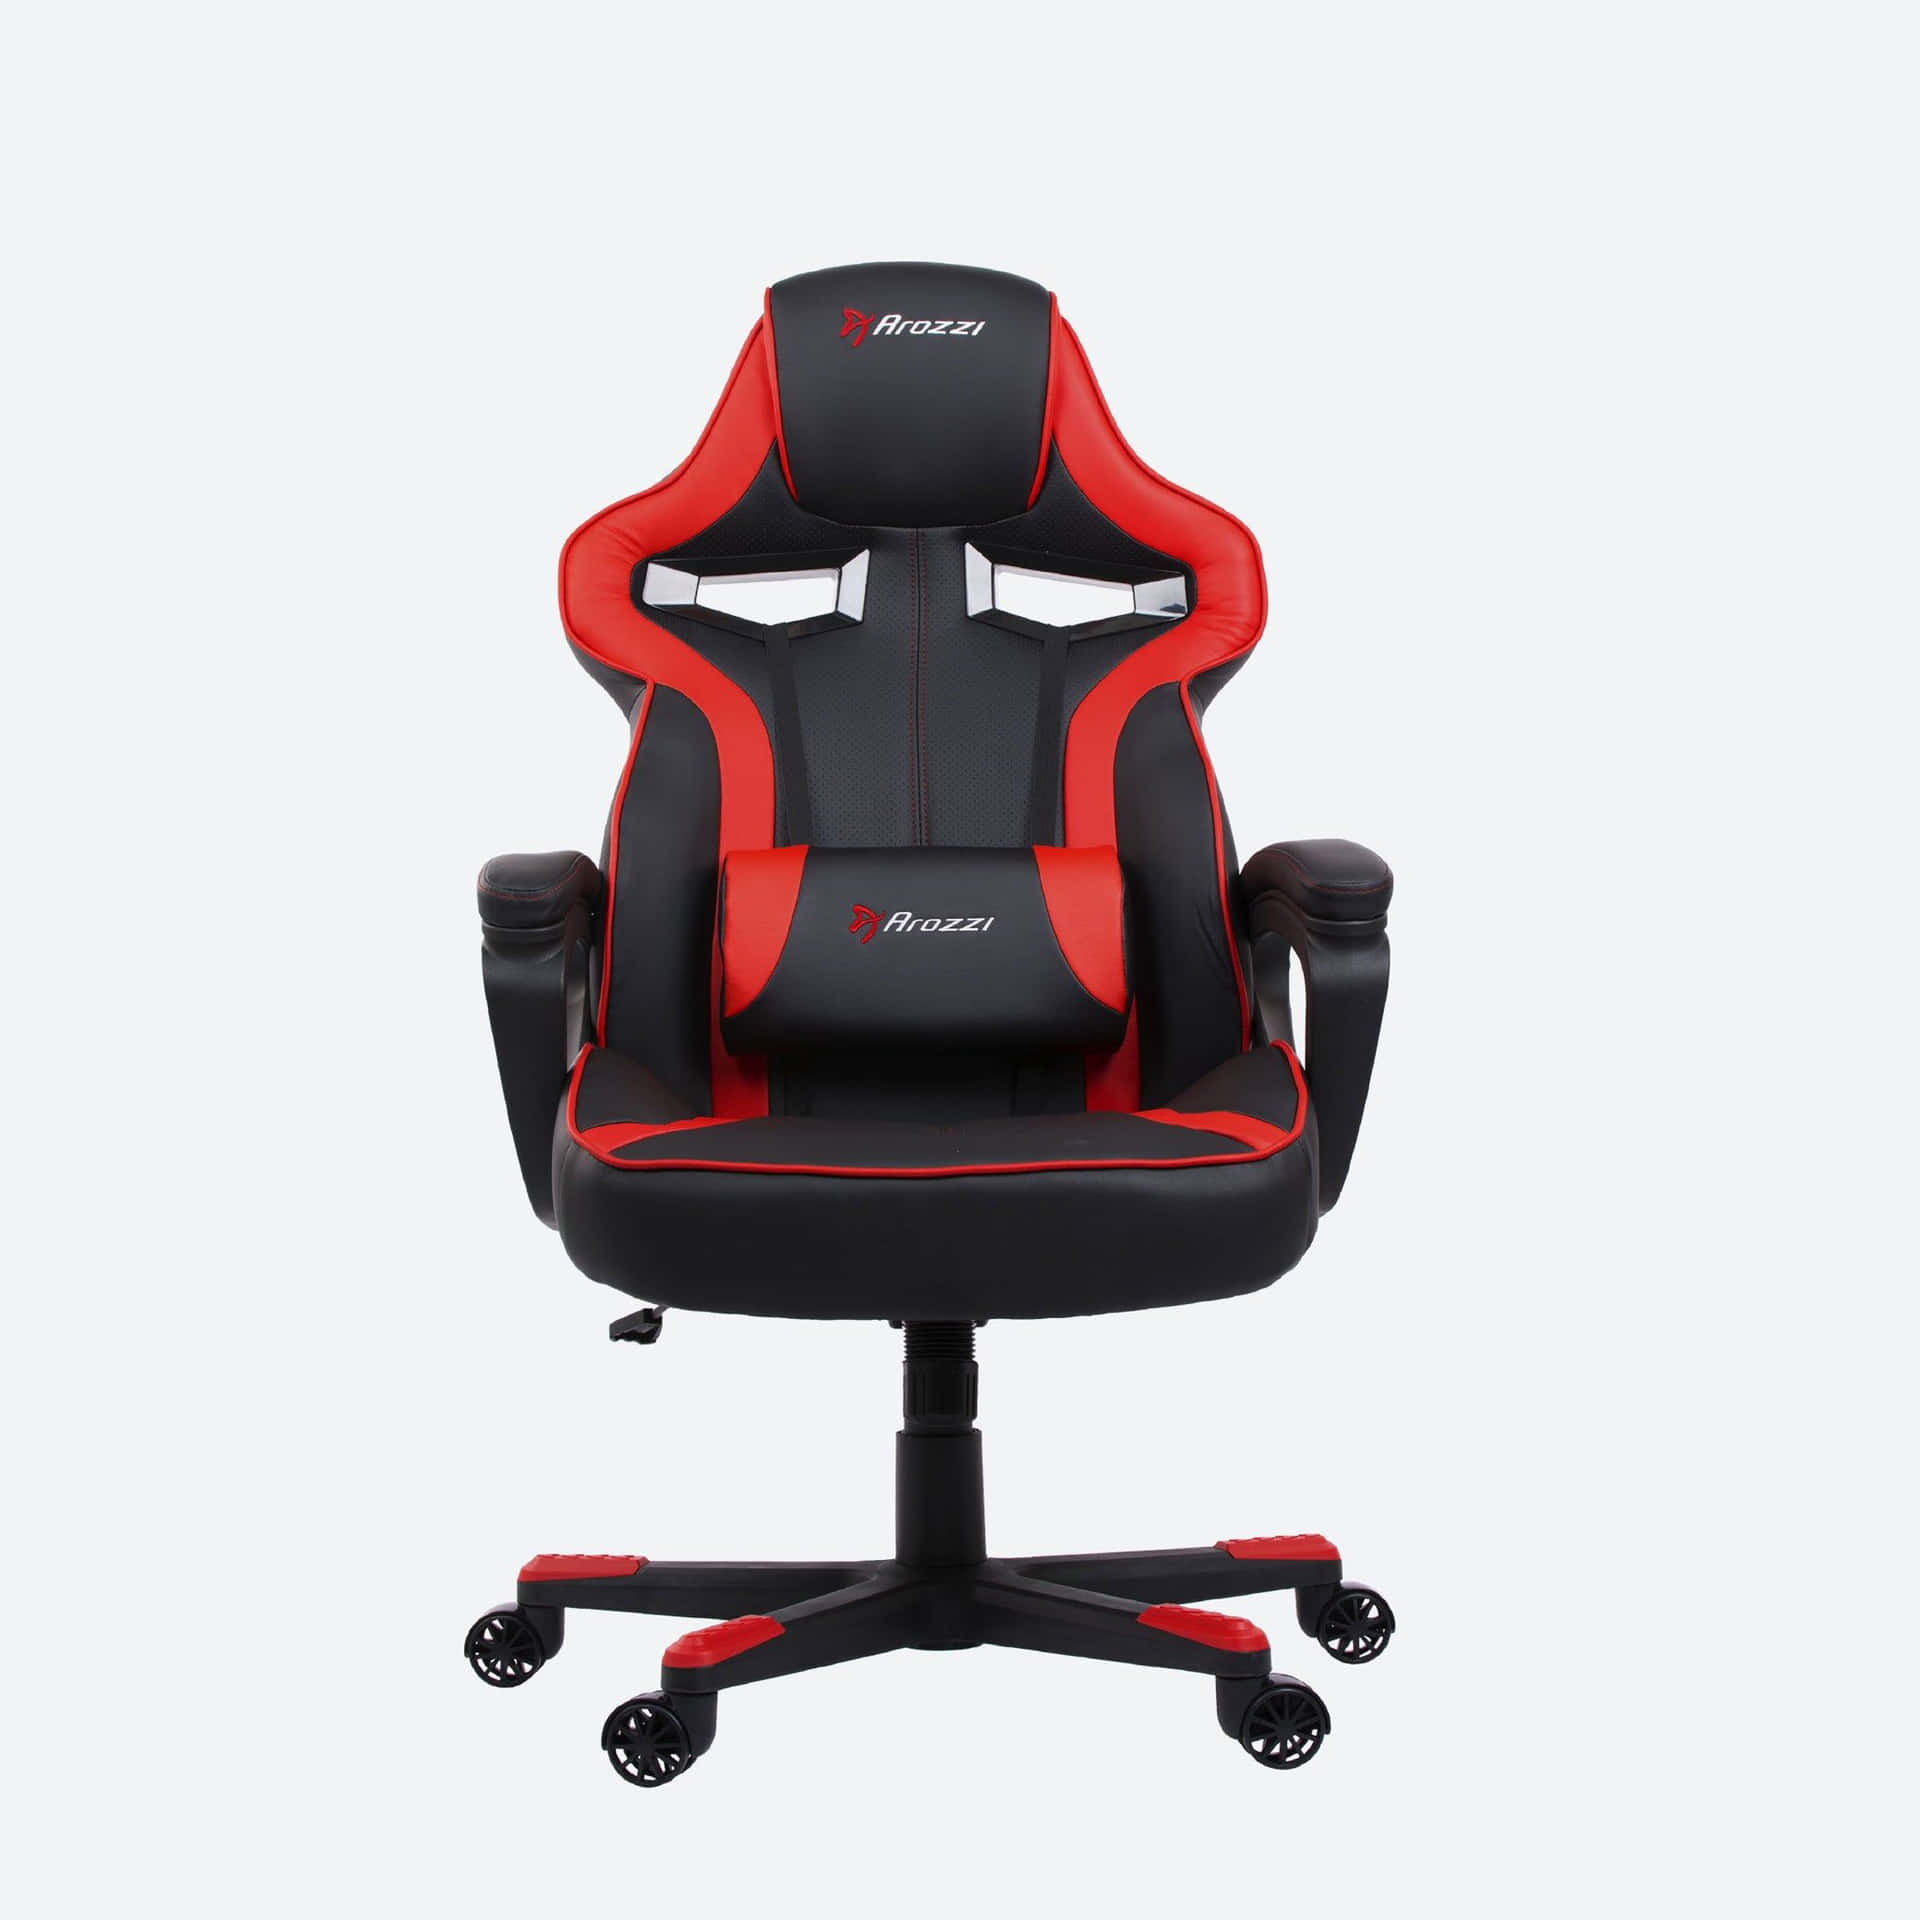 Get the comfort you deserve while playing your favorite video and computer games with gaming chairs. Wallpaper